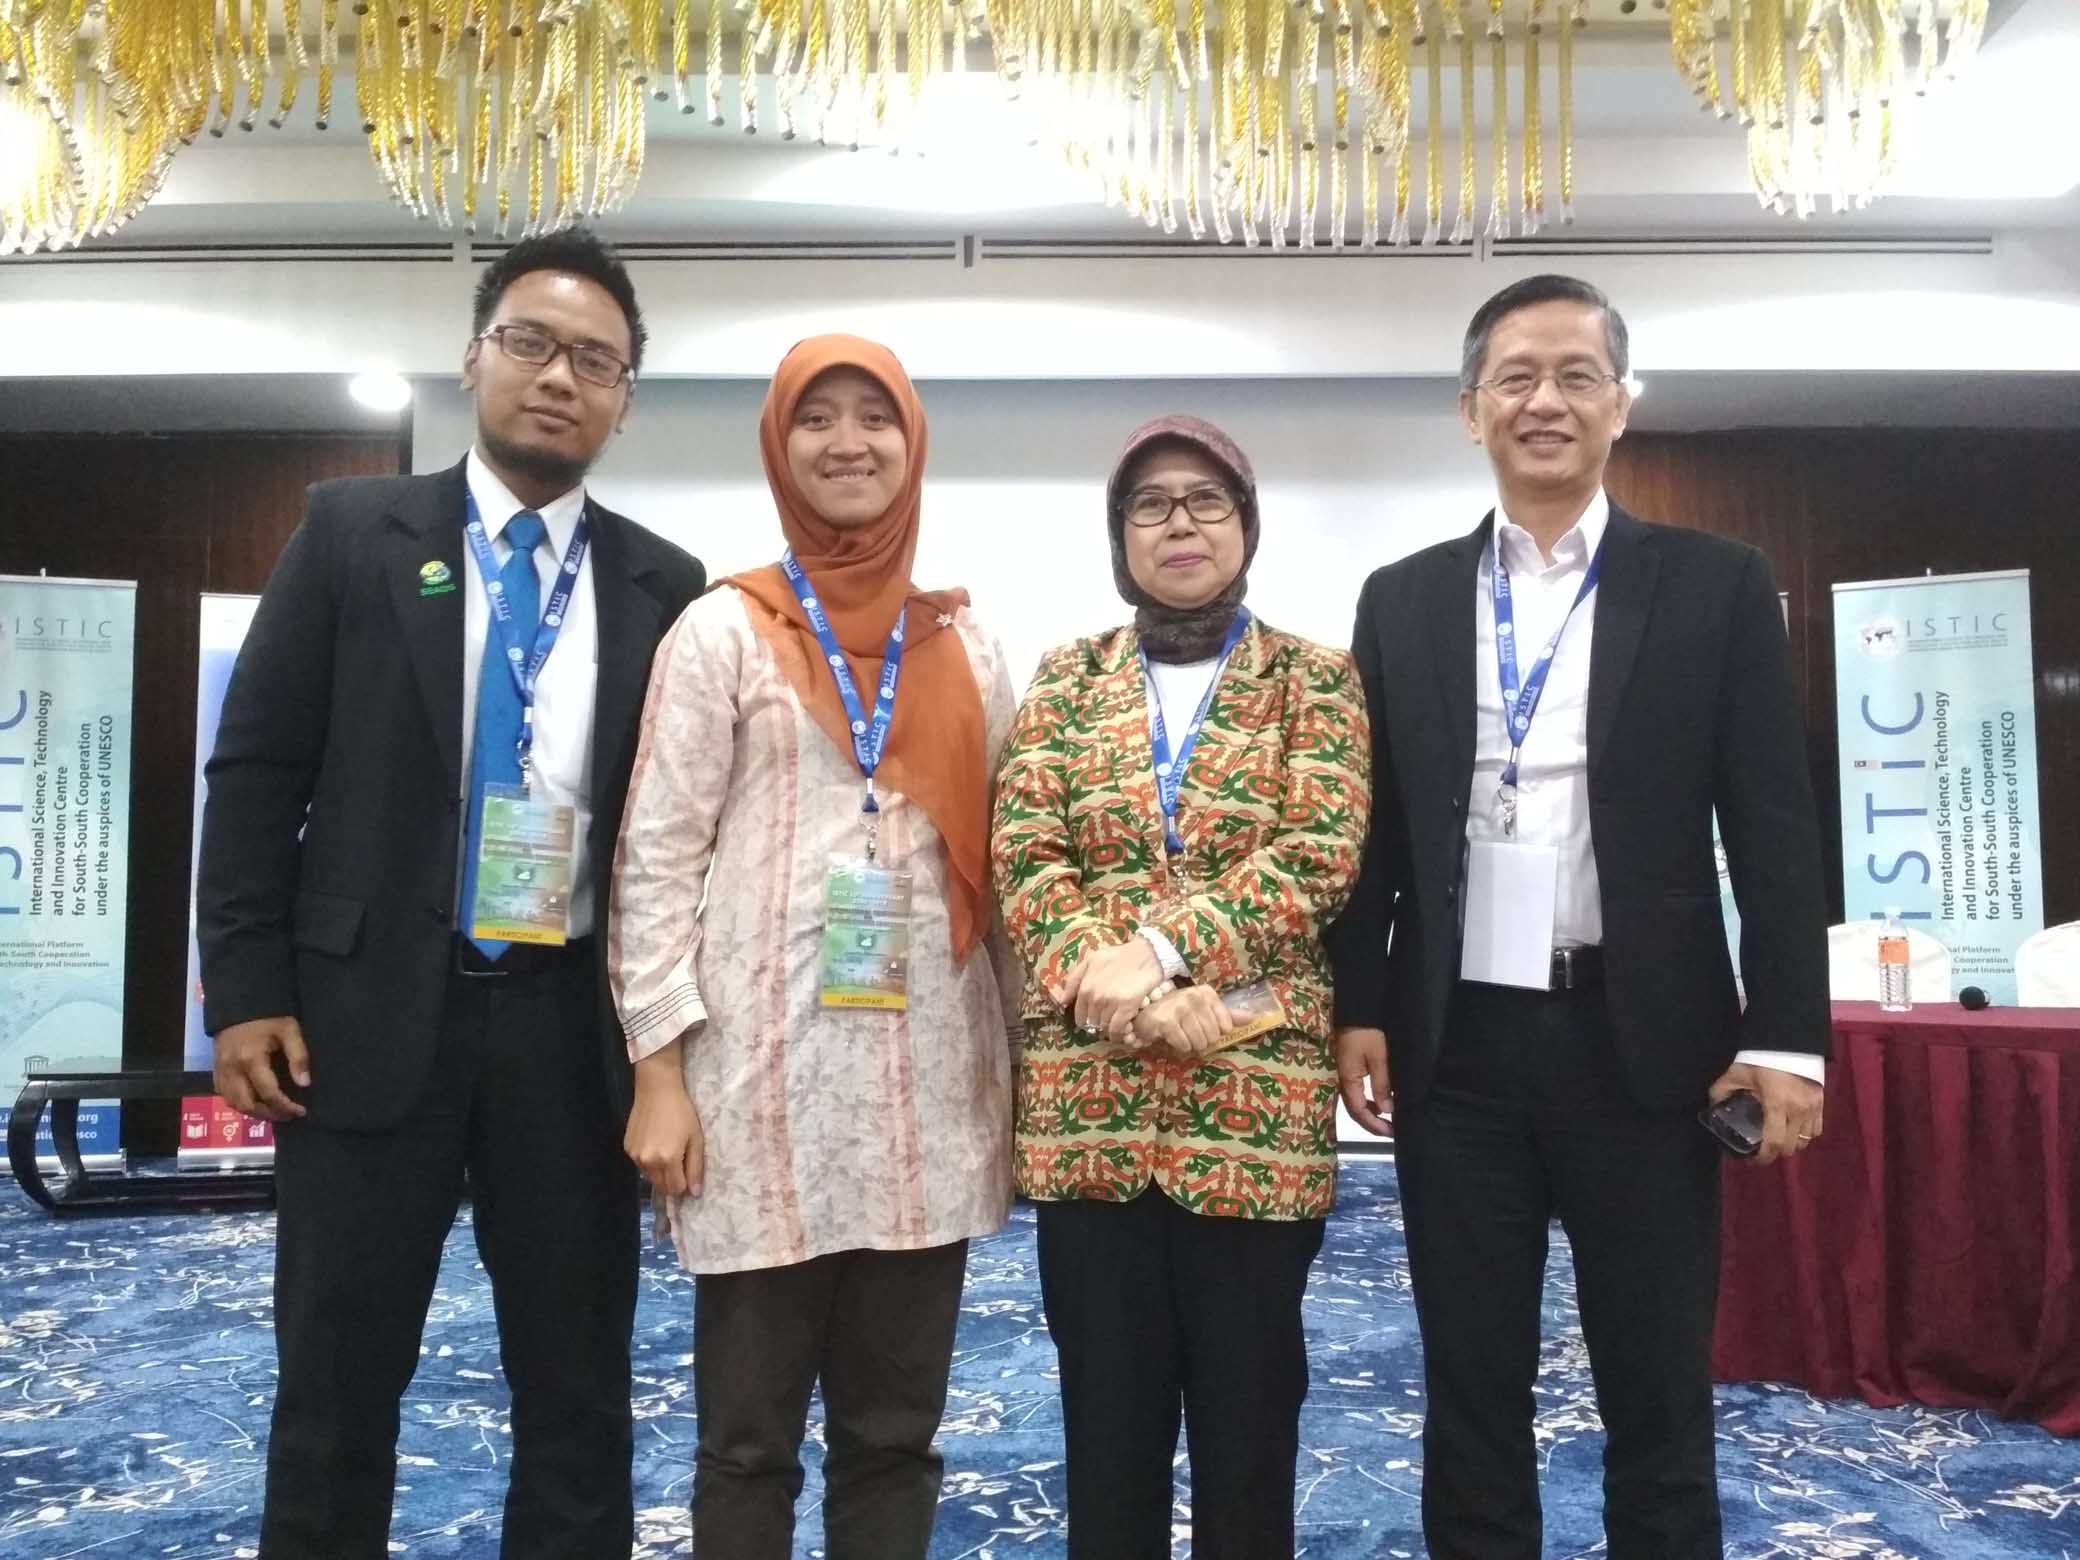 Congratulate from SEAQIS for ISTIC 10th Anniversary in International Conference on Climate Change Education